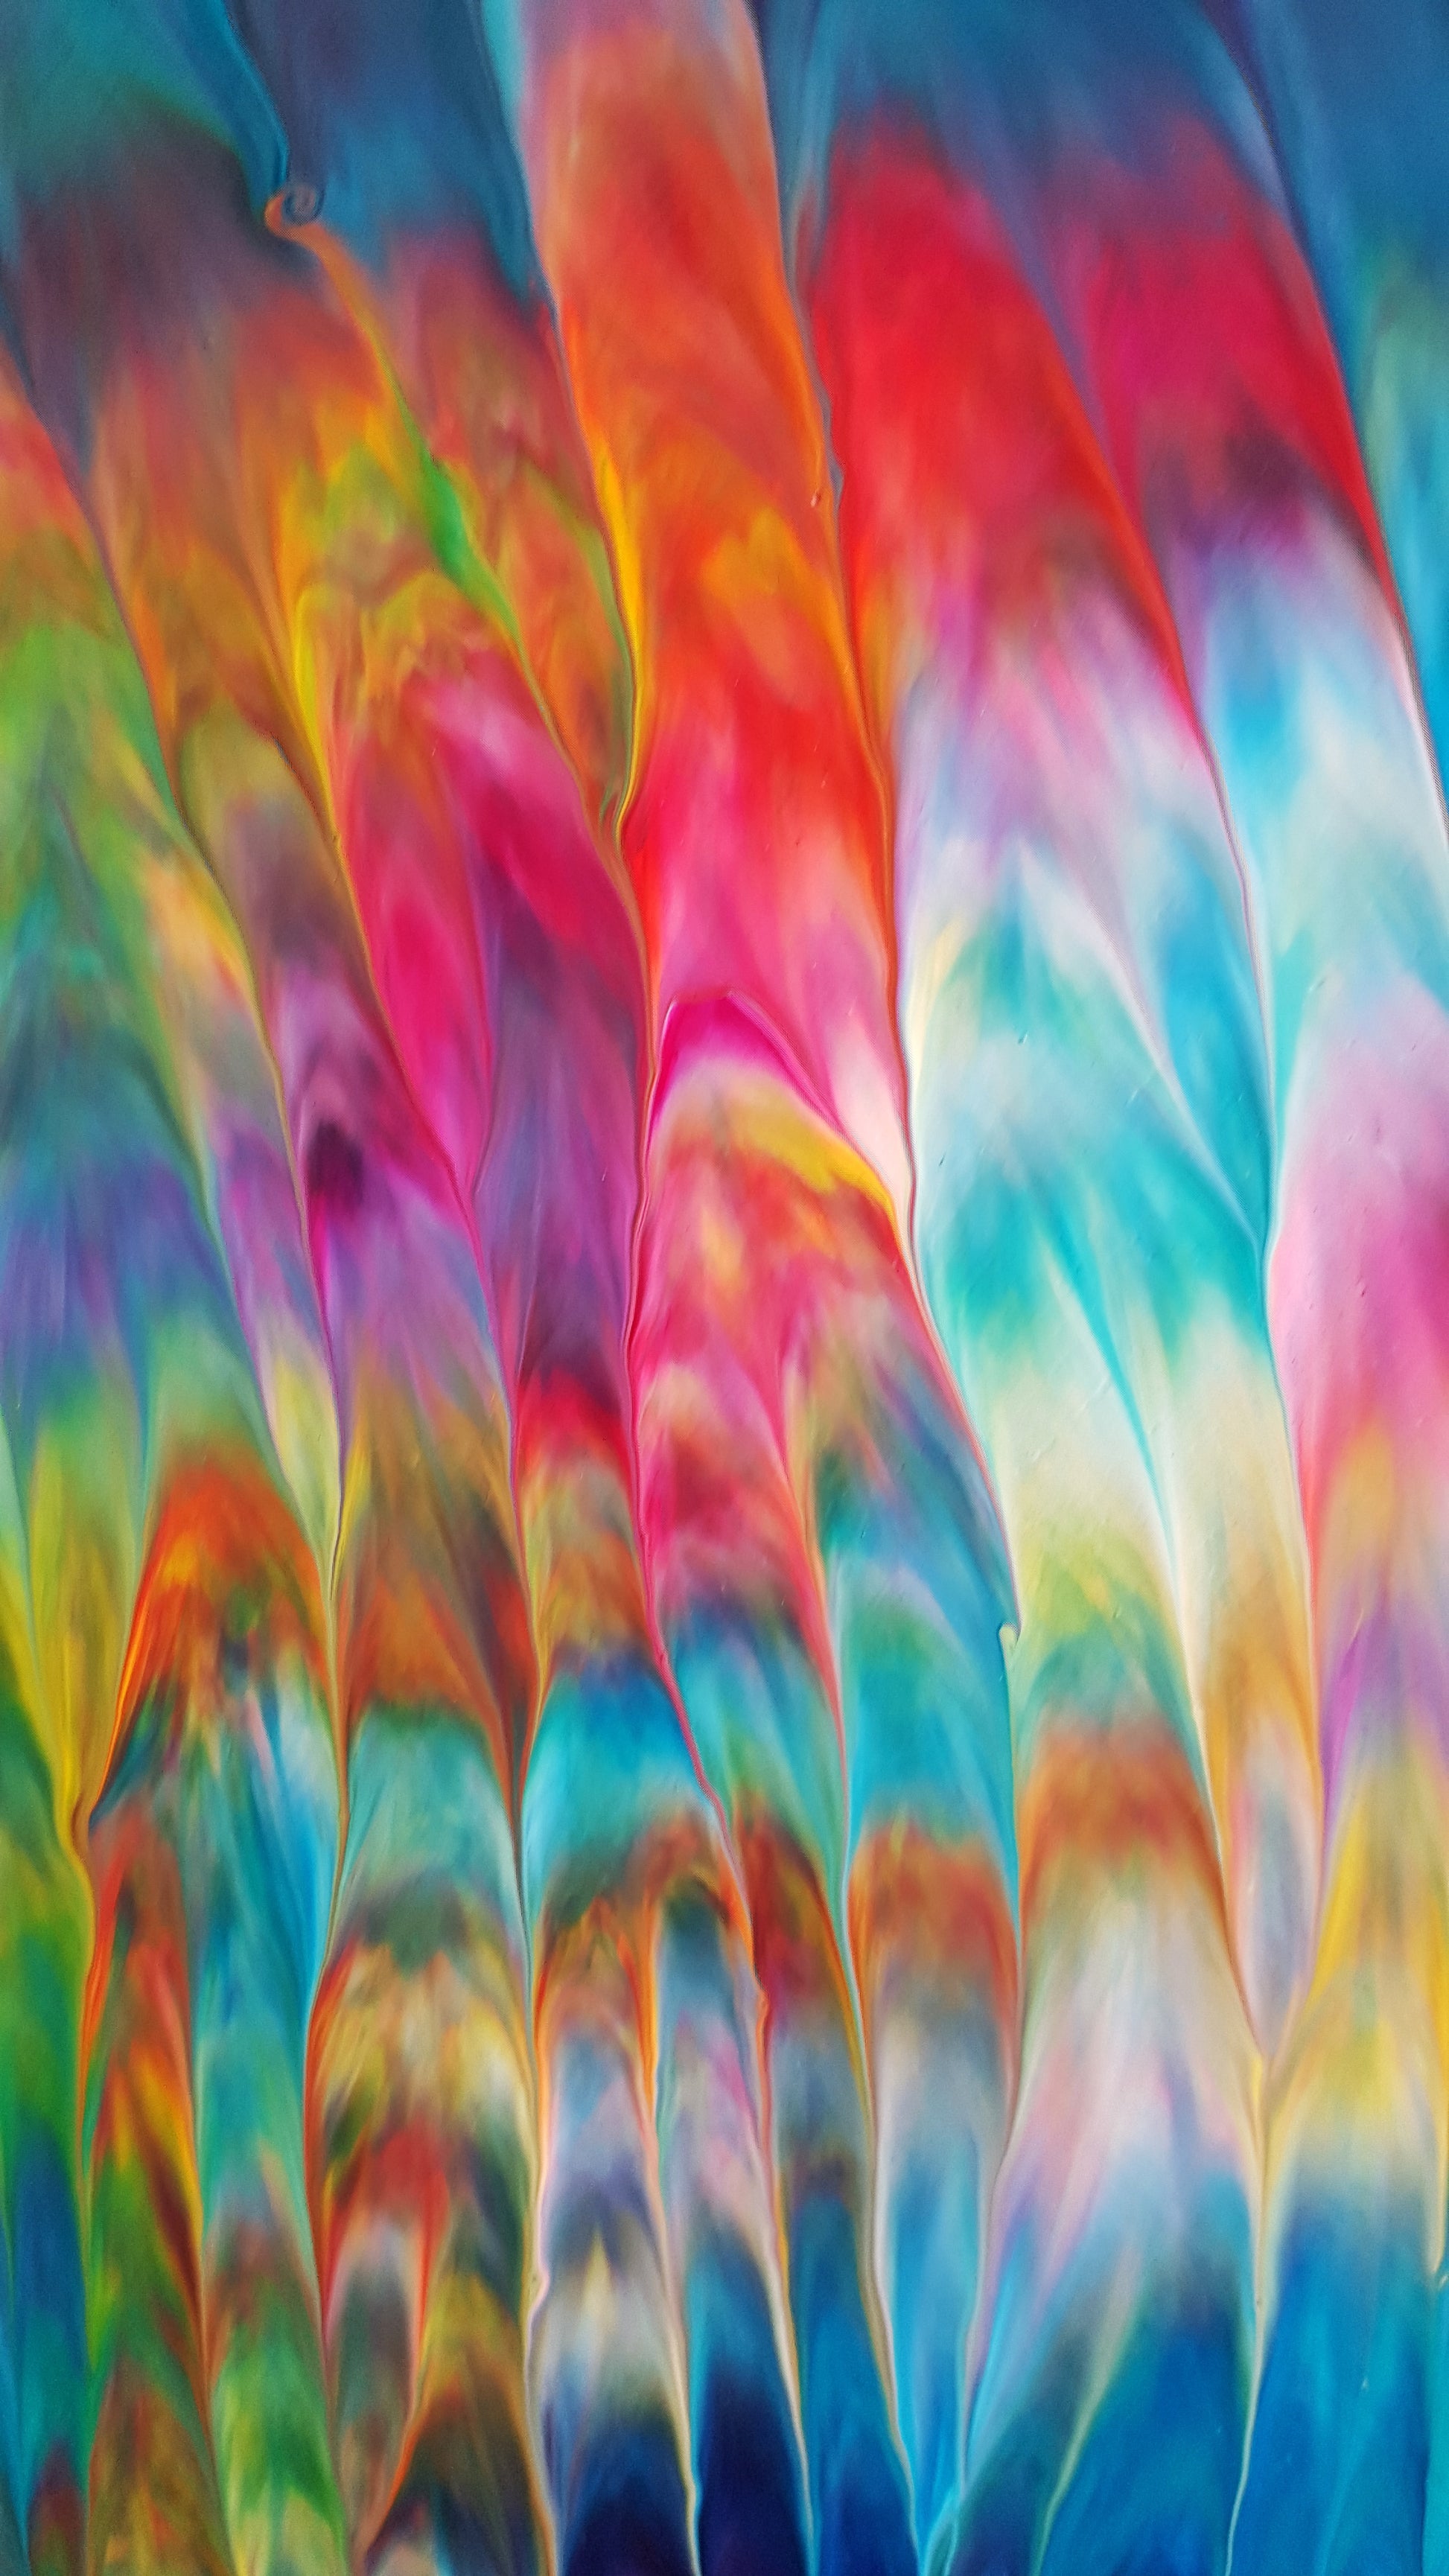 Psychedelic-Waterfall-No.-3-by-Alexandra-Romano-Art-Original-One-of-a-Kind-Abstract-Expressionism-Paintings-Buy-Affordable-Artwork-Toronto Art Gallery Colourful Canvas Artworks